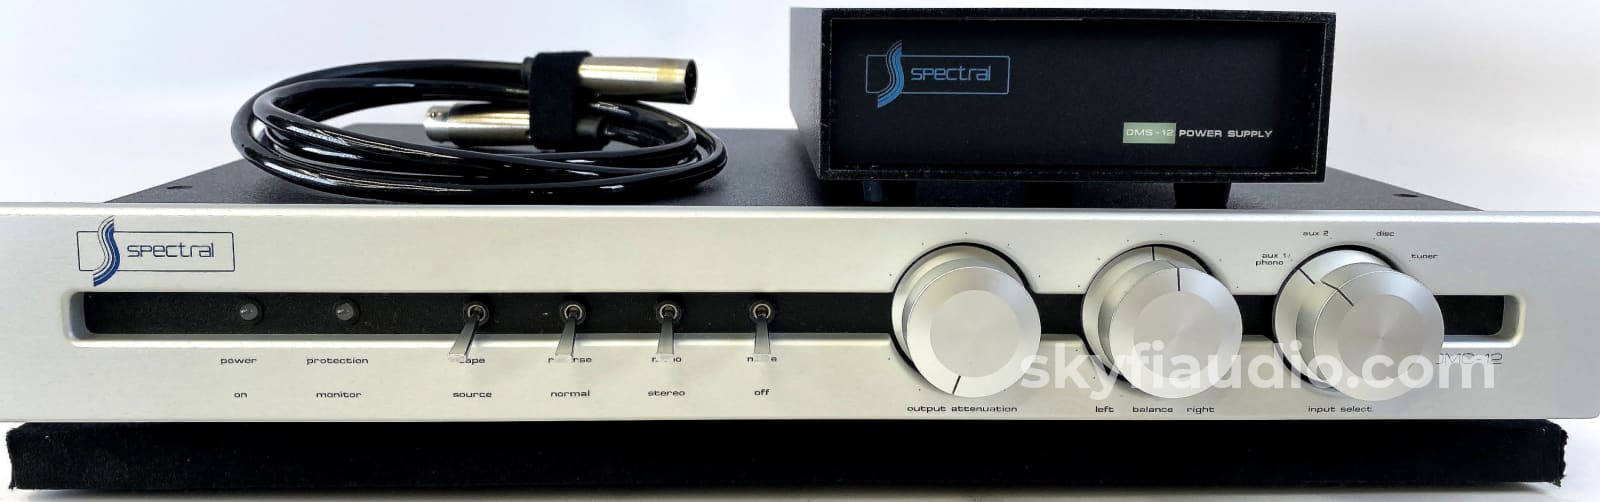 Spectral Dmc-12 Preamp With Phono Input And Power Supply - Complete Set Preamplifier